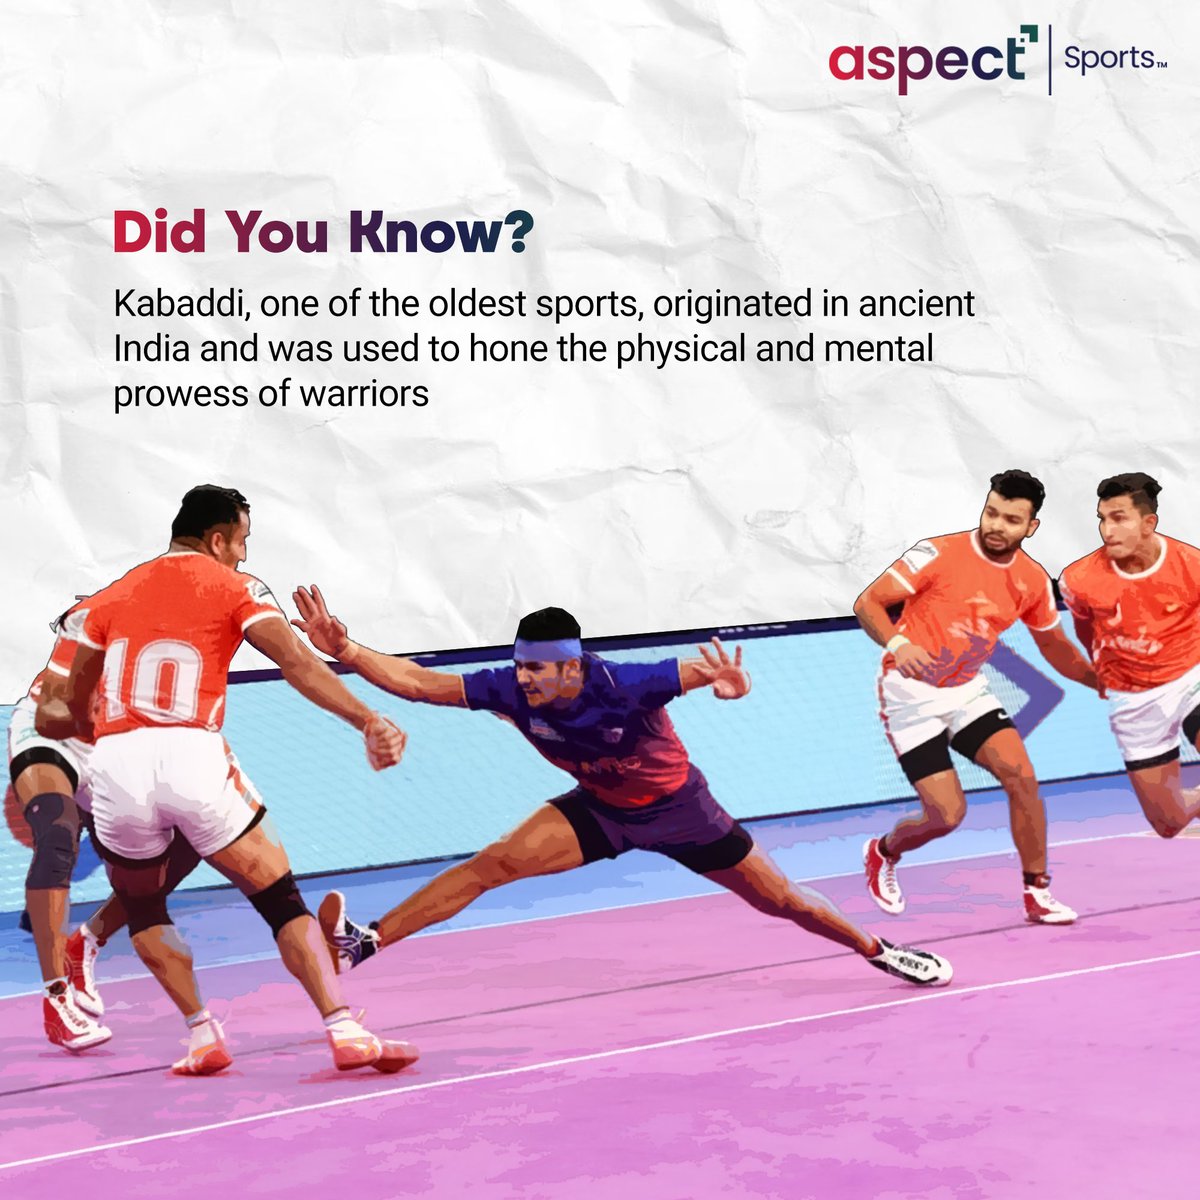 Travel back in time to the ancient battlefields of India, where Kabaddi was born as a test of strength and spirit. 💪🏽

#AspectSports #DidYouKnow #Kabaddi #OldestSports #IndianKabaddi #Sport #SportsIndustry #SportsManagement